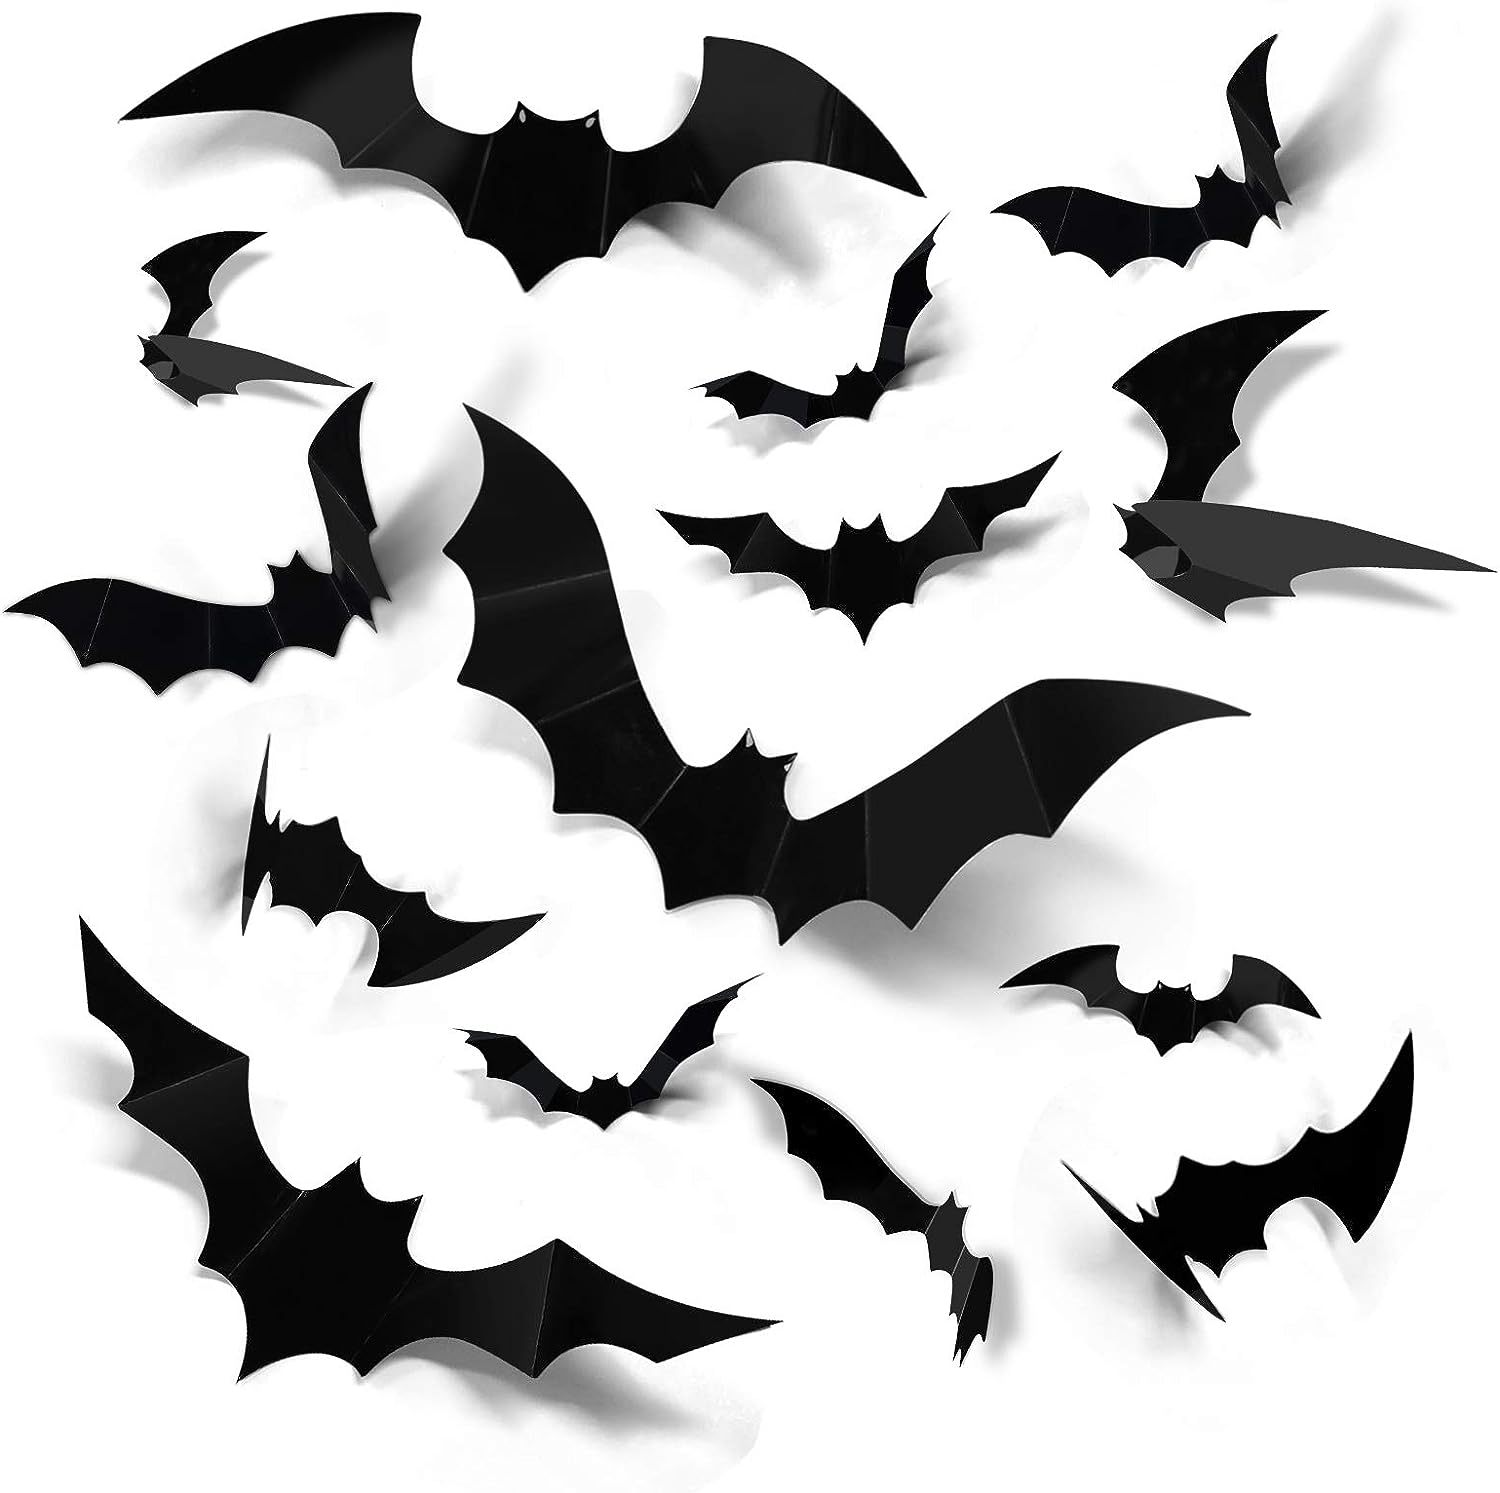 56pcs pack Halloween bat stickers 3D stereoscopic bat stickers decorative stickers black bat stickers party decorations